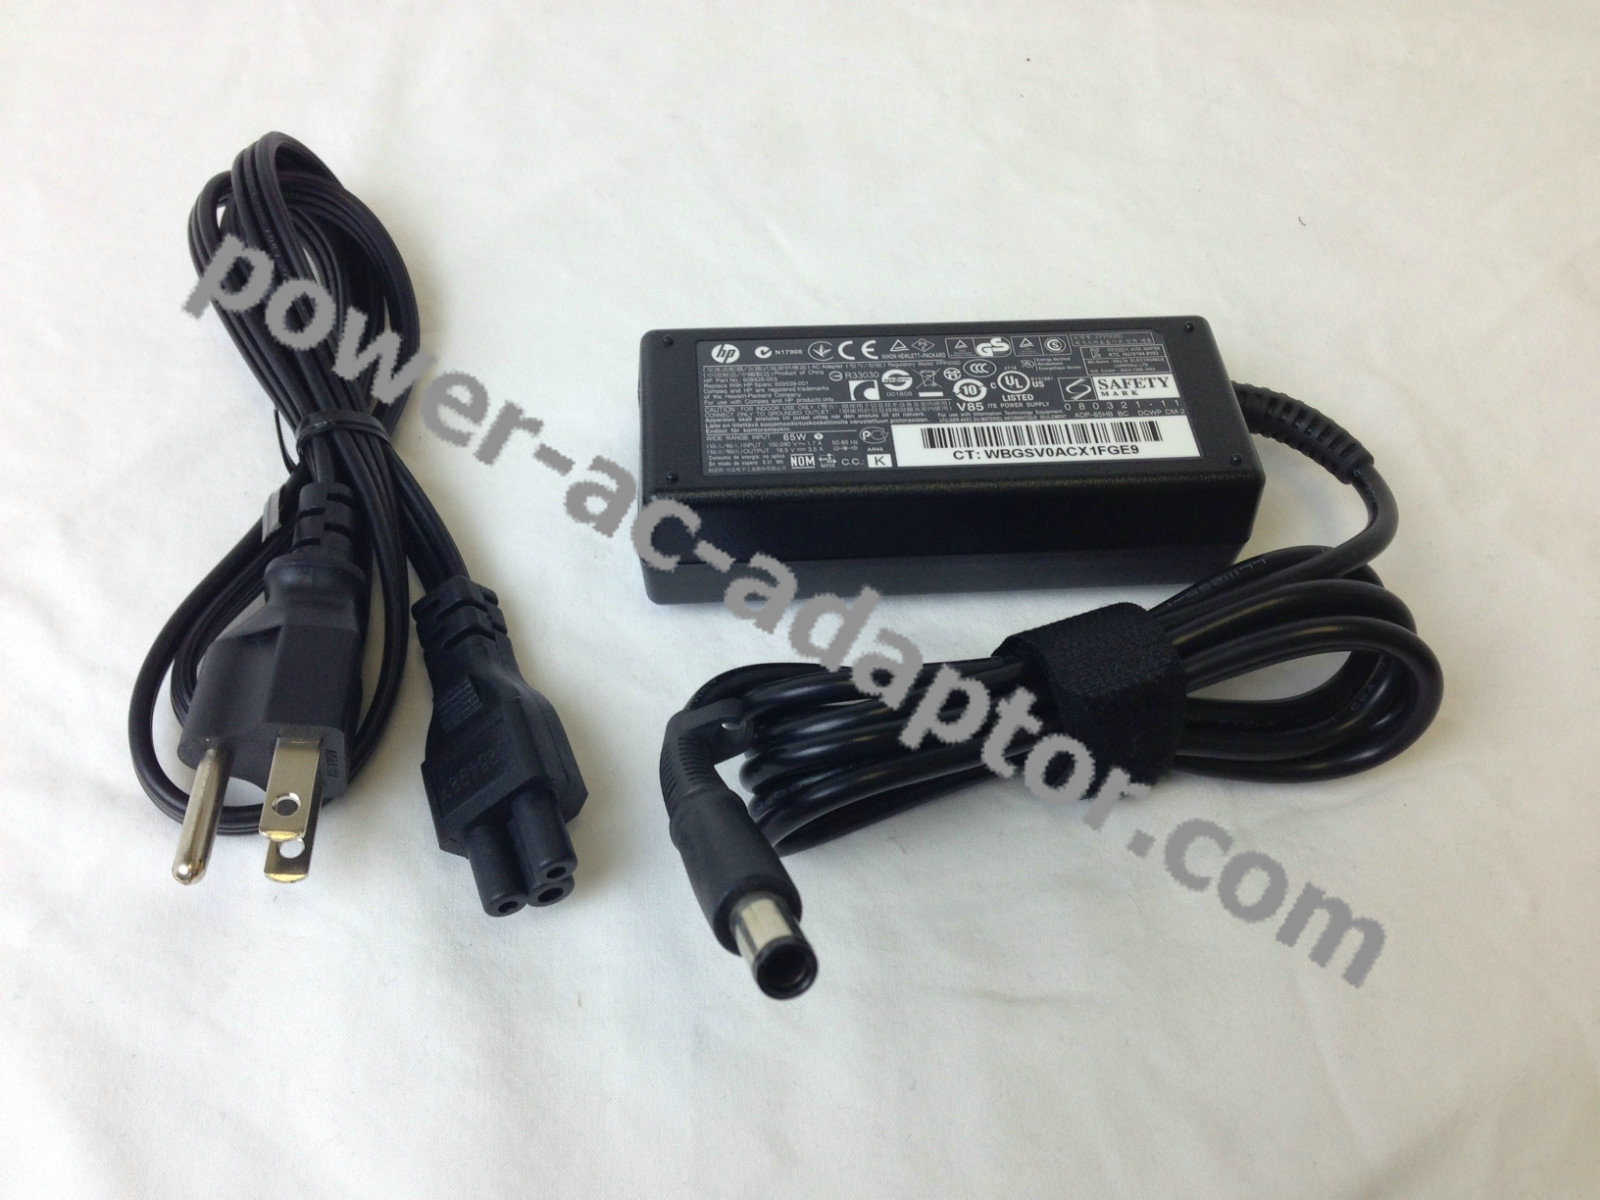 AC ADAPTER FOR HIPro HP-OK065B13 LF SE 384019-002 65W POWER SUP